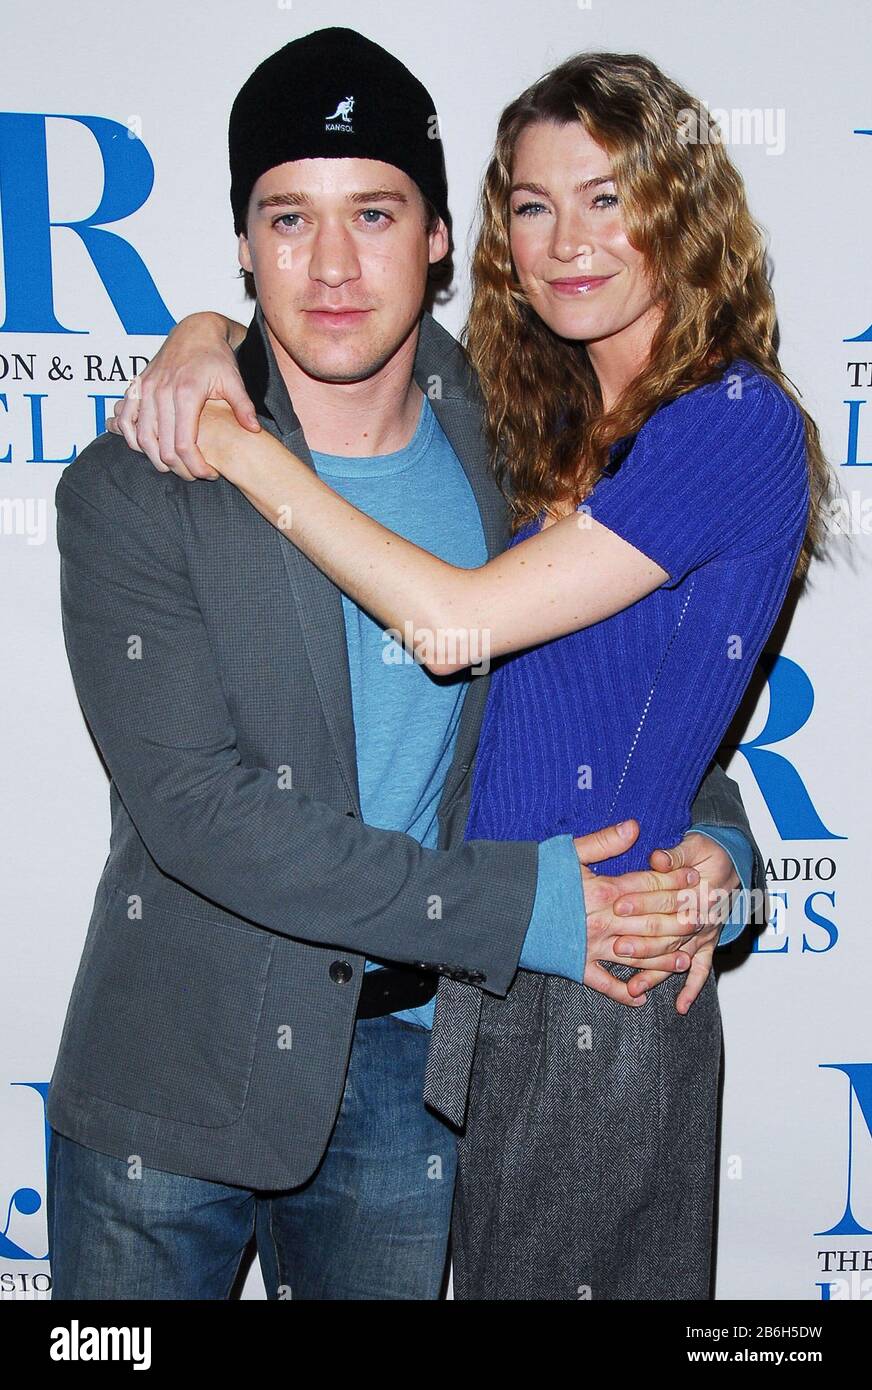 T.R. Knight and Ellen Pompeo at The 23rd Annual William S. Paley Television Festival Presents 'Grey's Anatomy' at the Directors Guild of America in West Hollywood, CA. The event took place on Tuesday, February 28, 2006. Photo by: SBM / PictureLux All Rights Reserved - File Reference #33984-1069SBMPLX Stock Photo